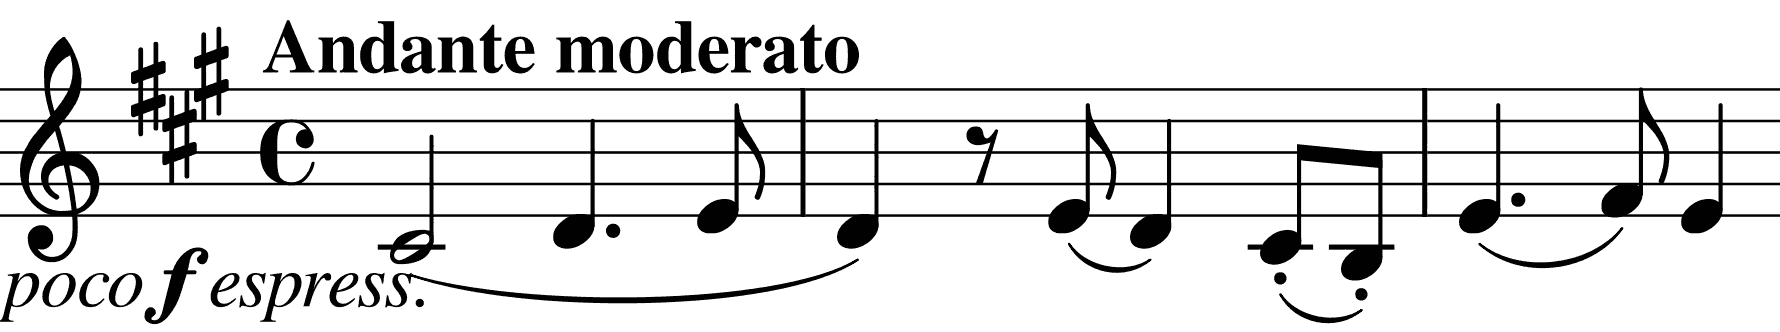 opening of the second movement